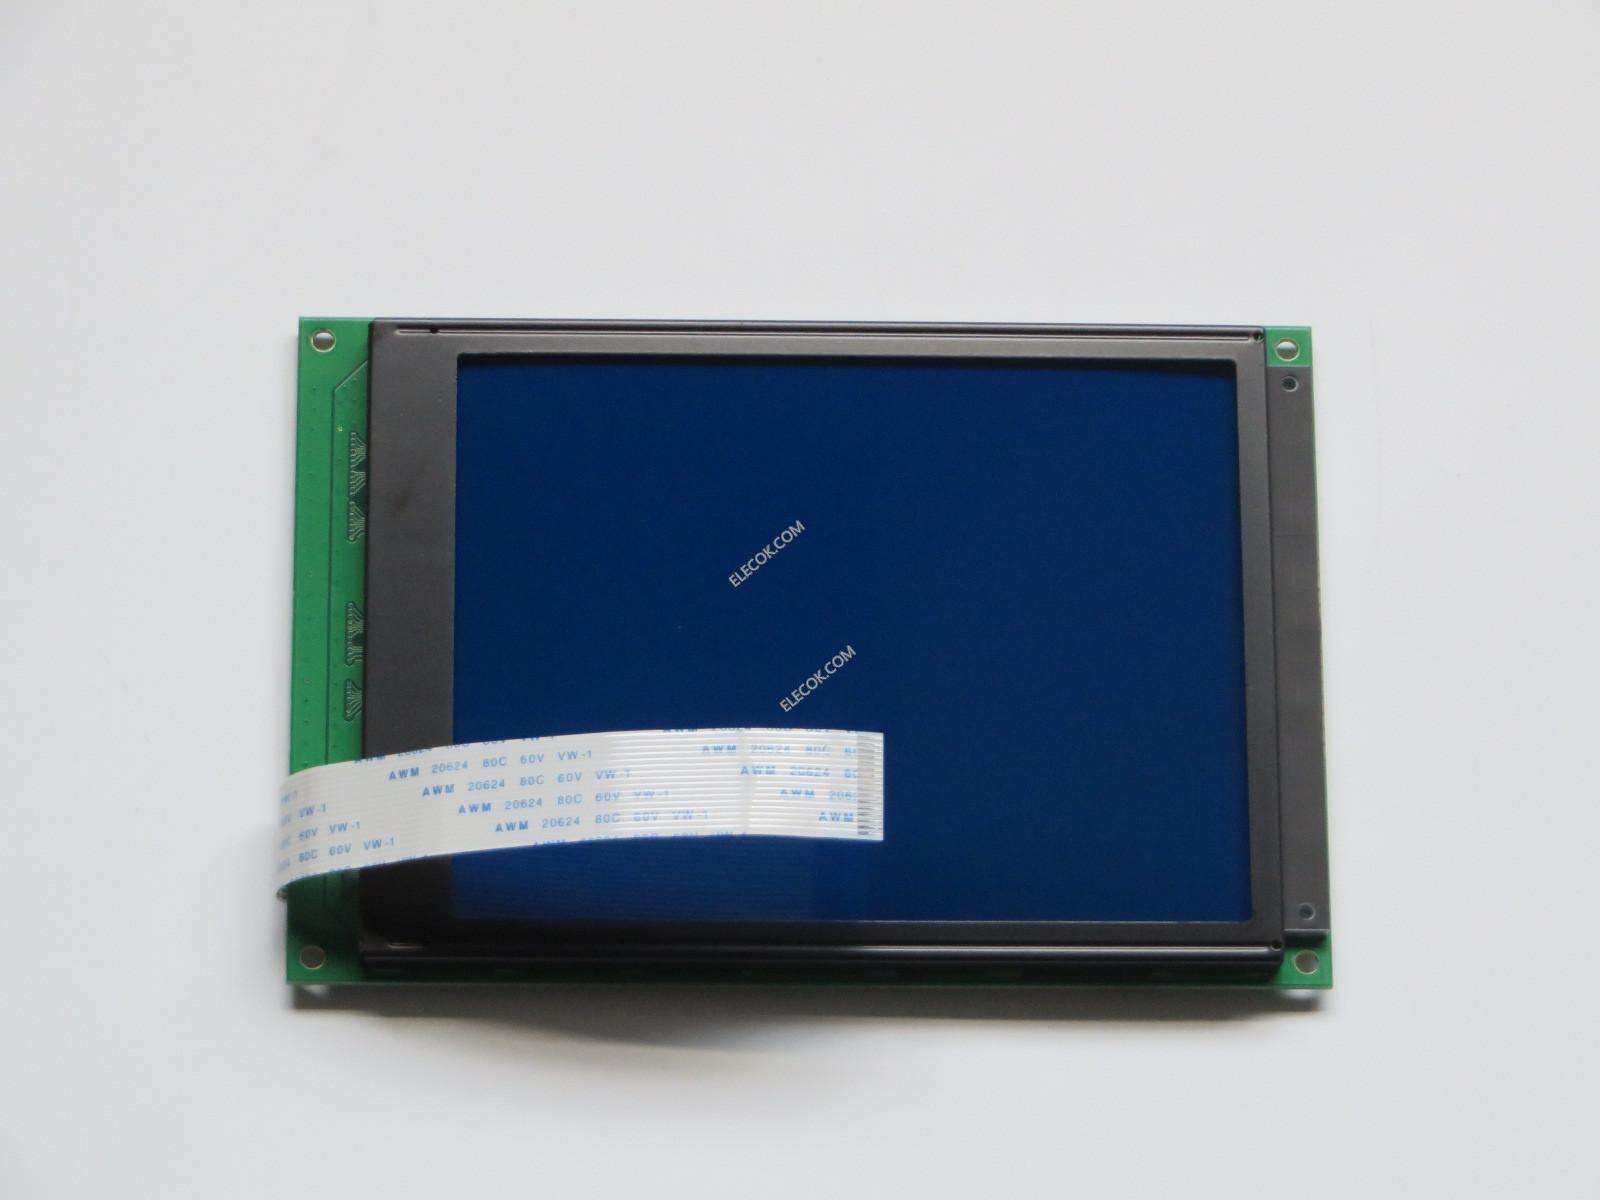 NEW For SIEMENS TP177A 6AV6642-0AA11-0AX1 LCD Screen Display Replace  #H3223 YD 